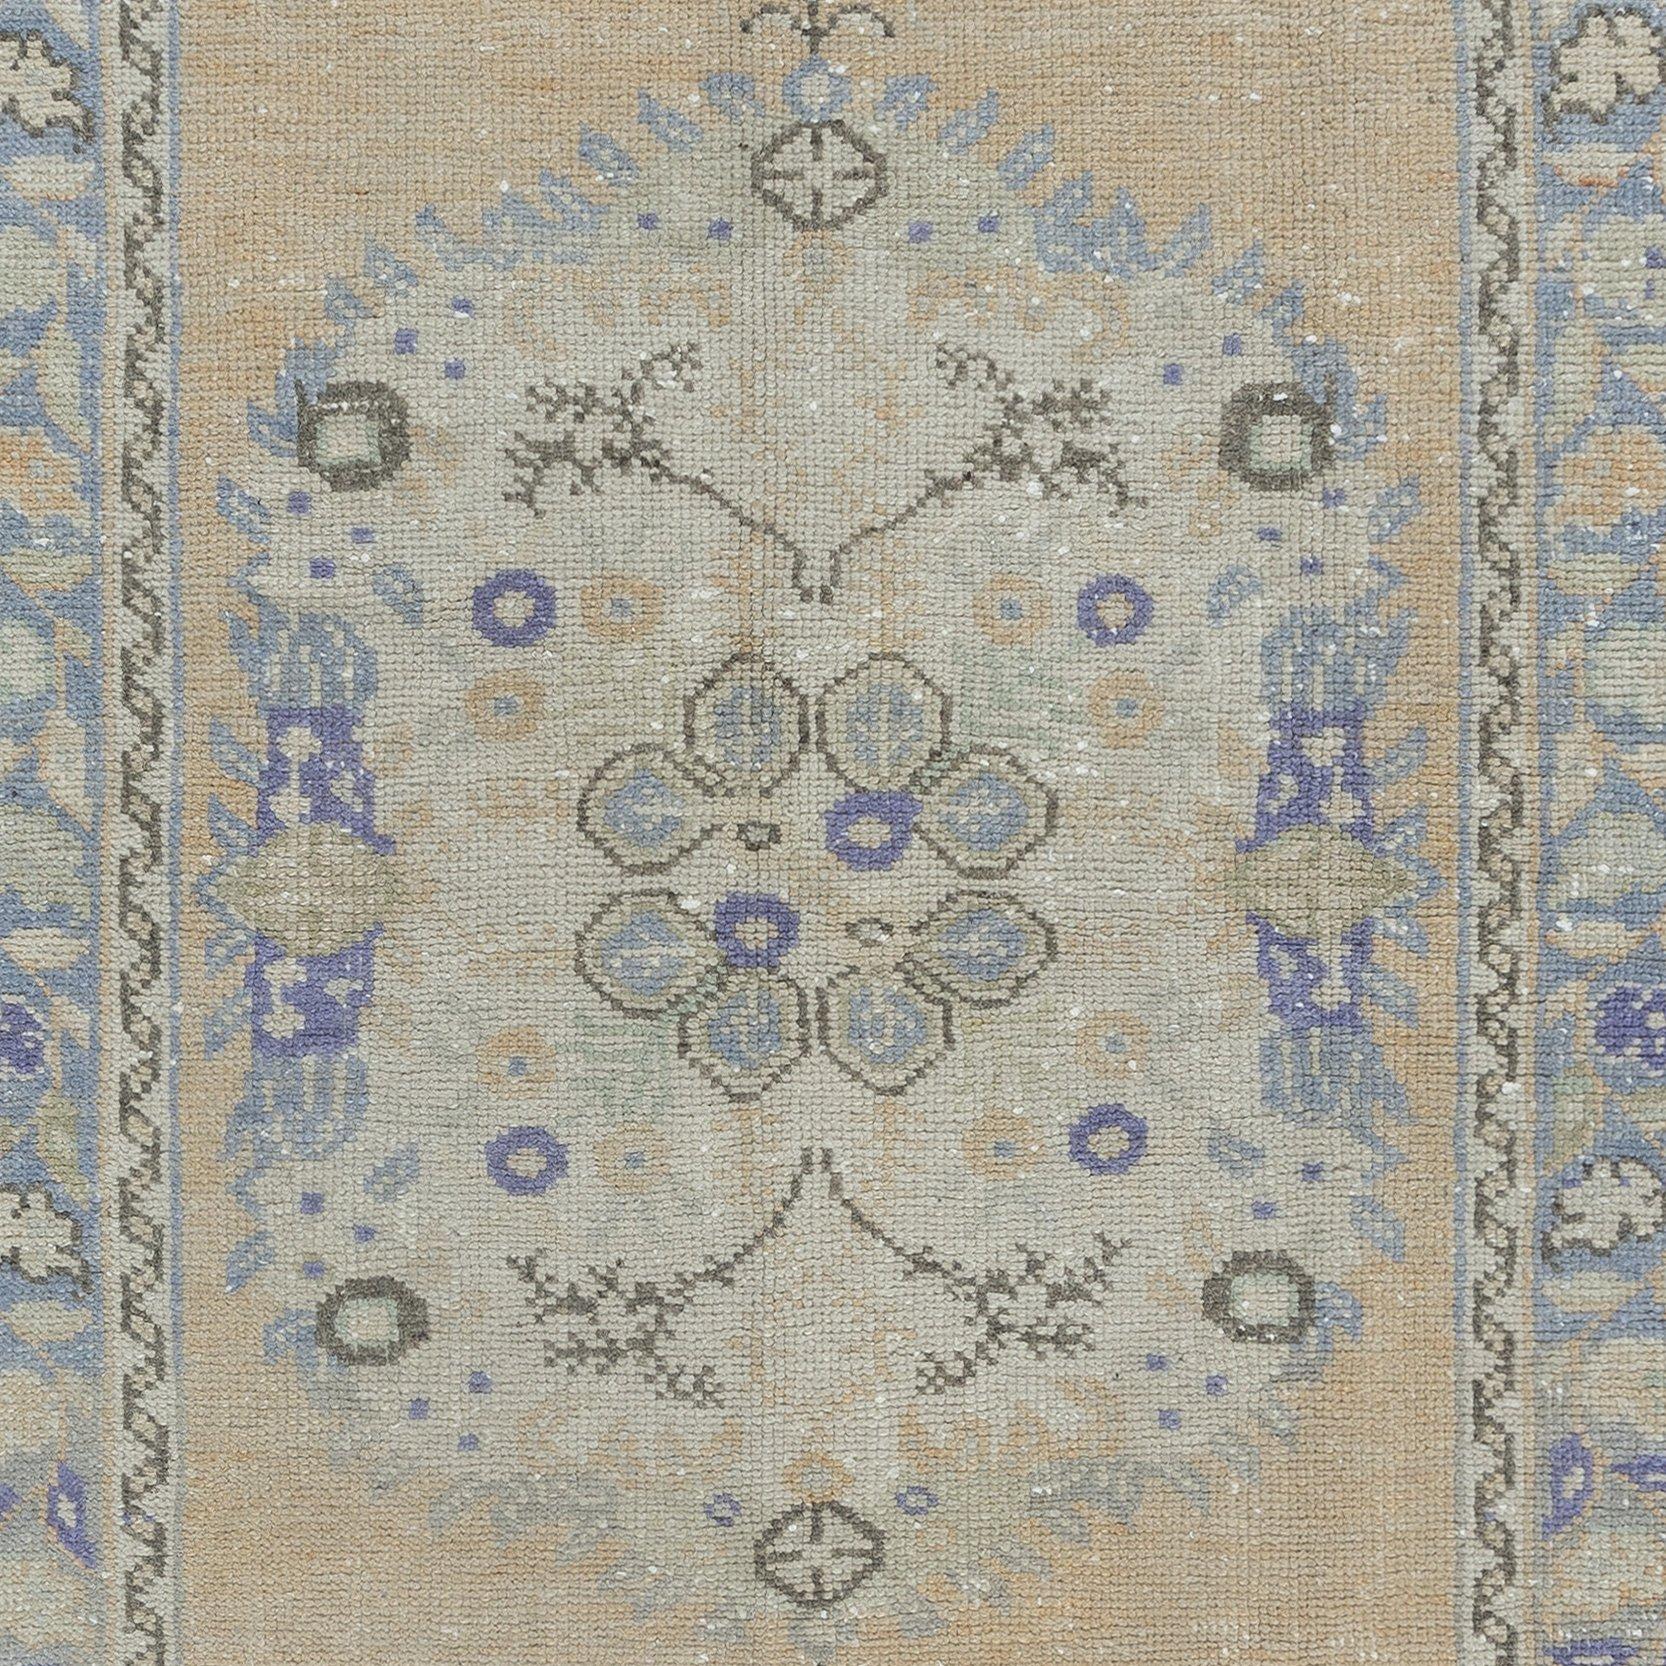 3.2x6.5 Ft Hand Knotted Turkish Rug with Soft Colors, Mid-20th Century Carpet In Good Condition For Sale In Philadelphia, PA